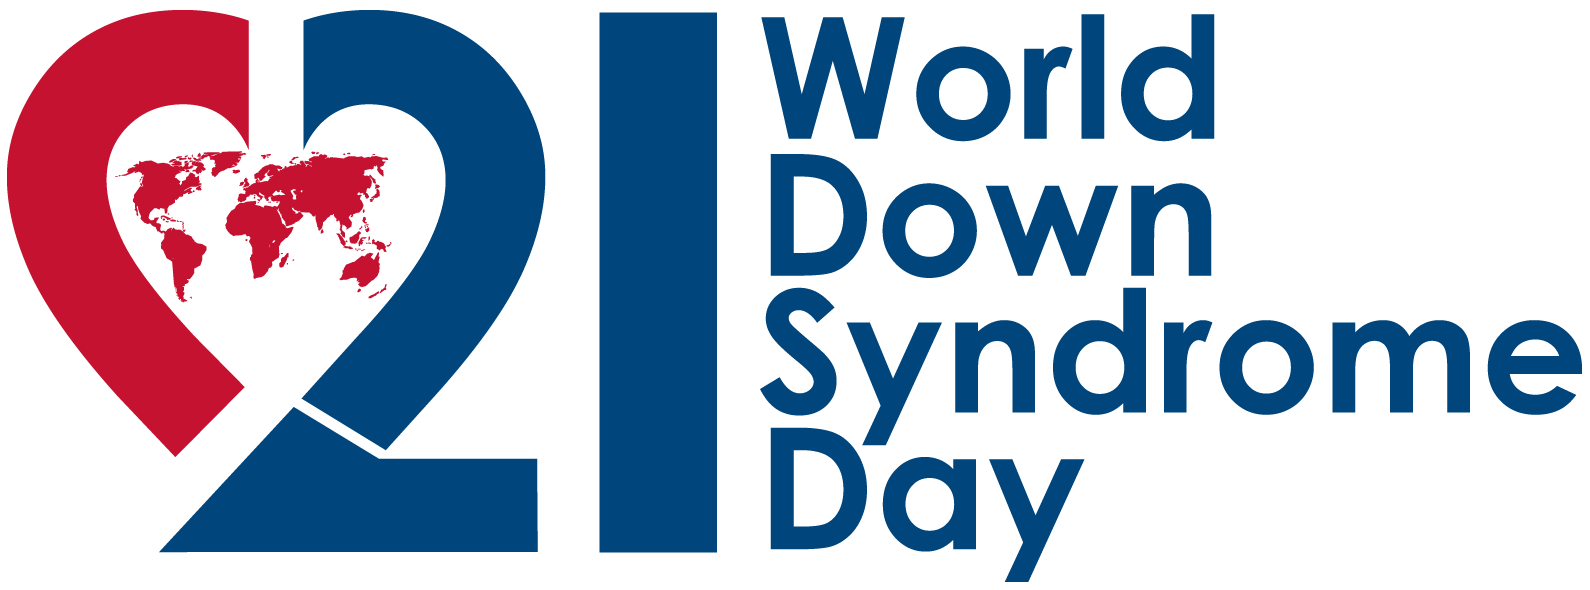 national down syndrome symbol